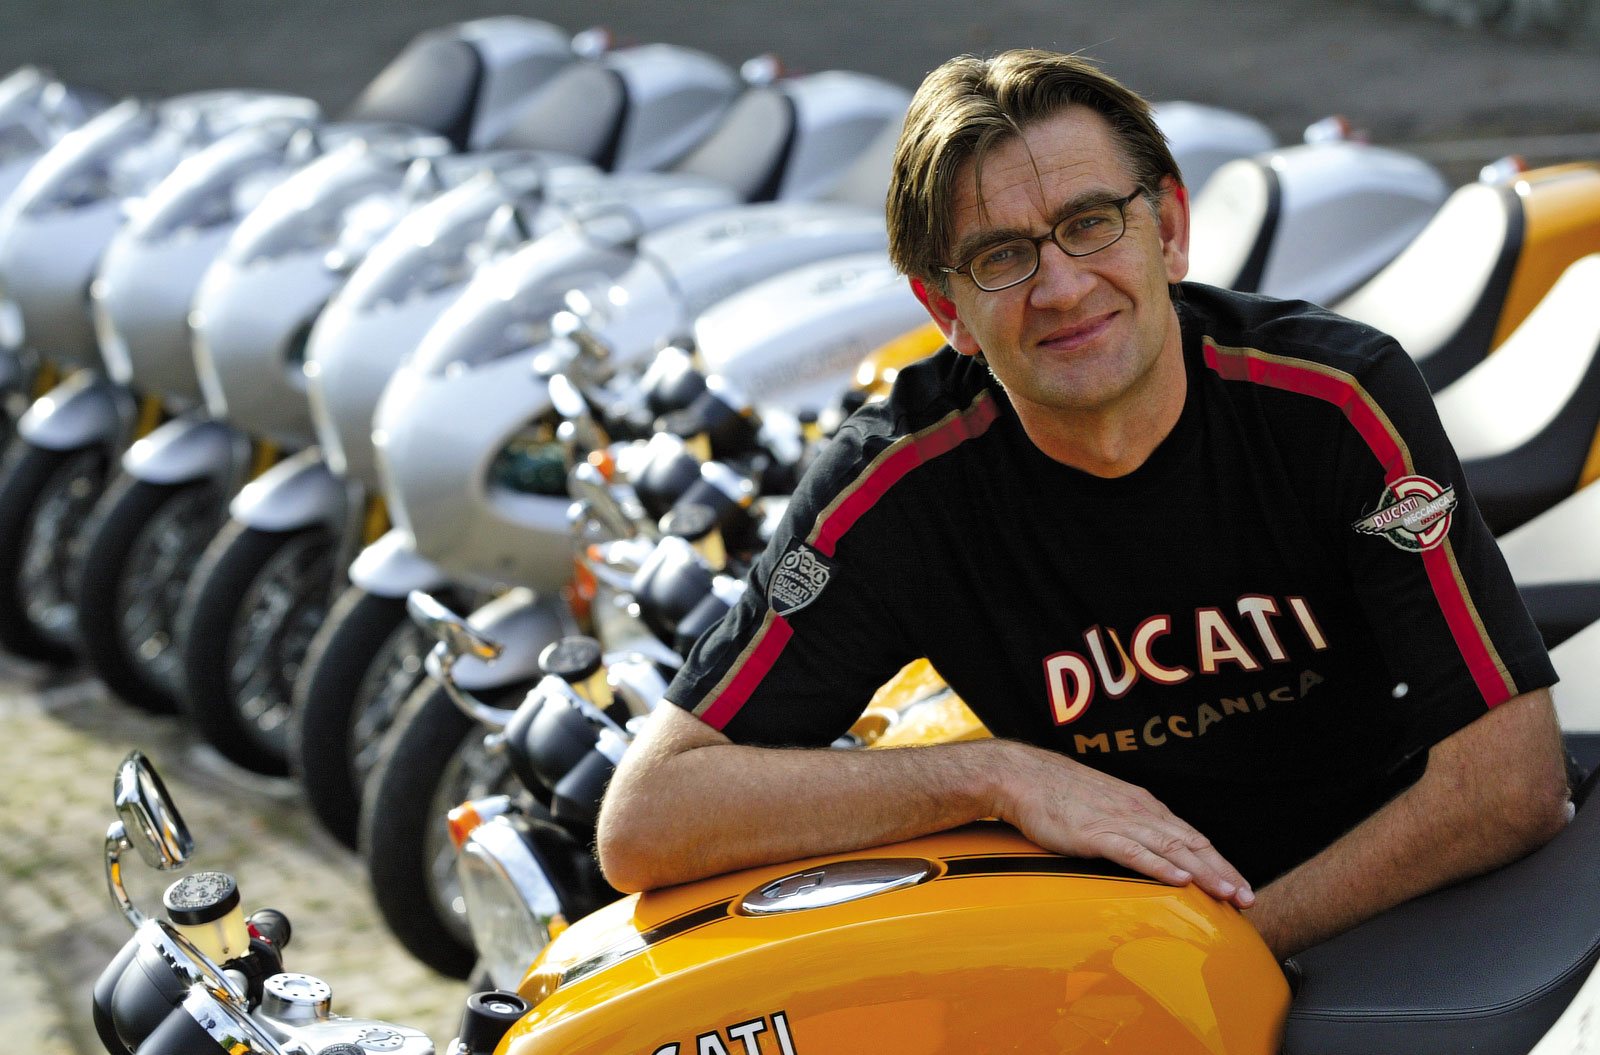 Pierre Terblanche joins Royal Enfield